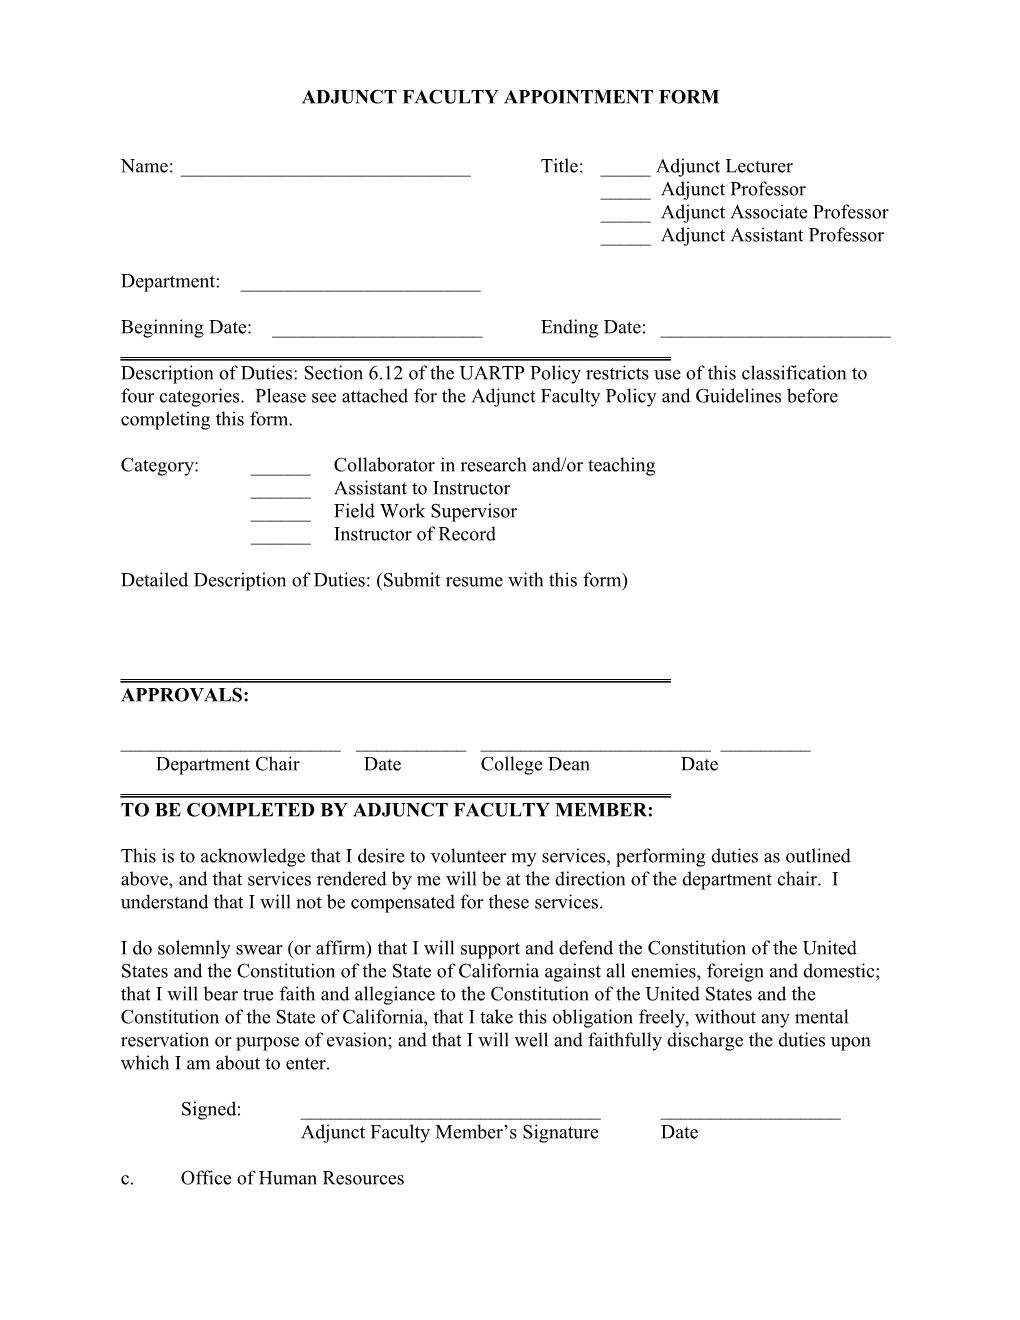 Adjunct Faculty Appointment Form